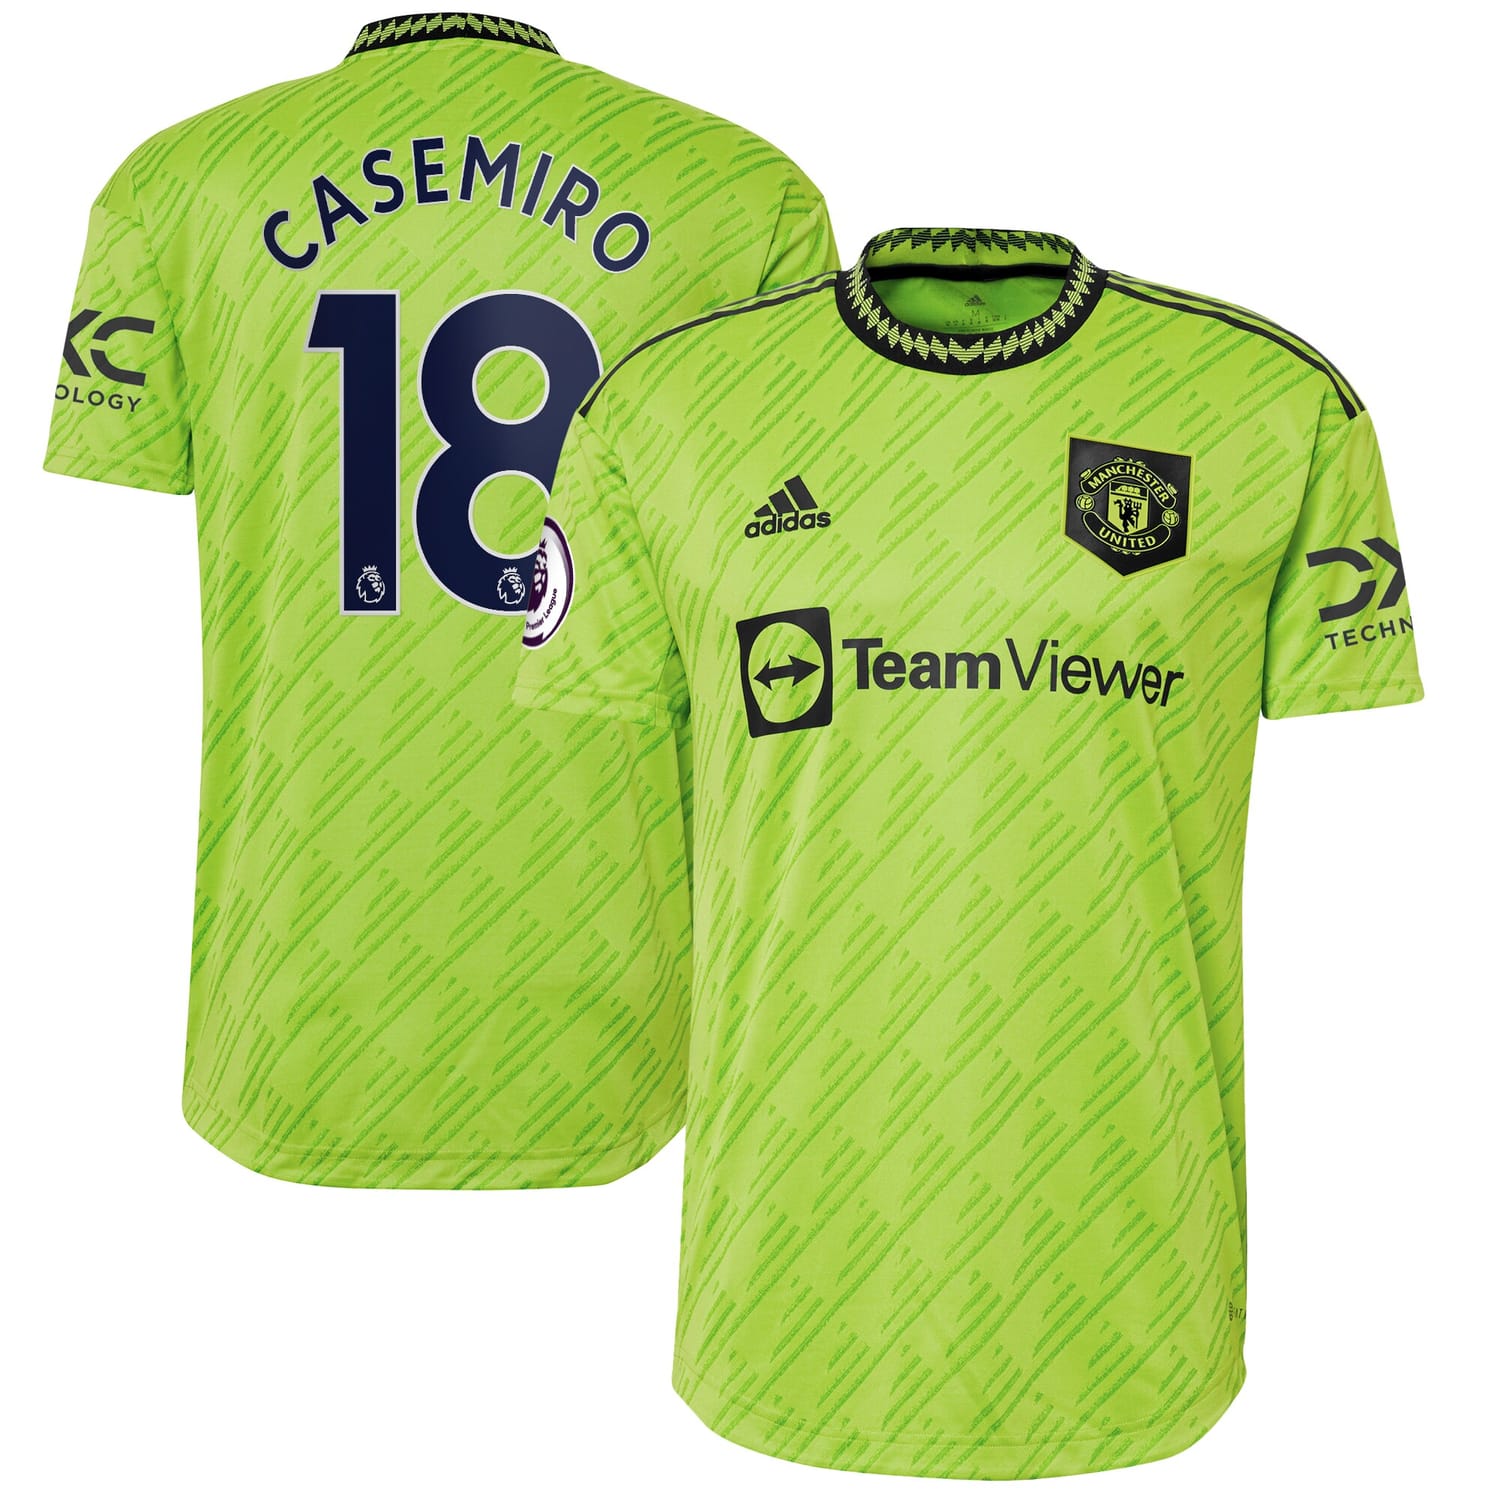 Premier League Manchester United Third Authentic Jersey Shirt Neon Green 2022-23 player Casemiro printing for Men